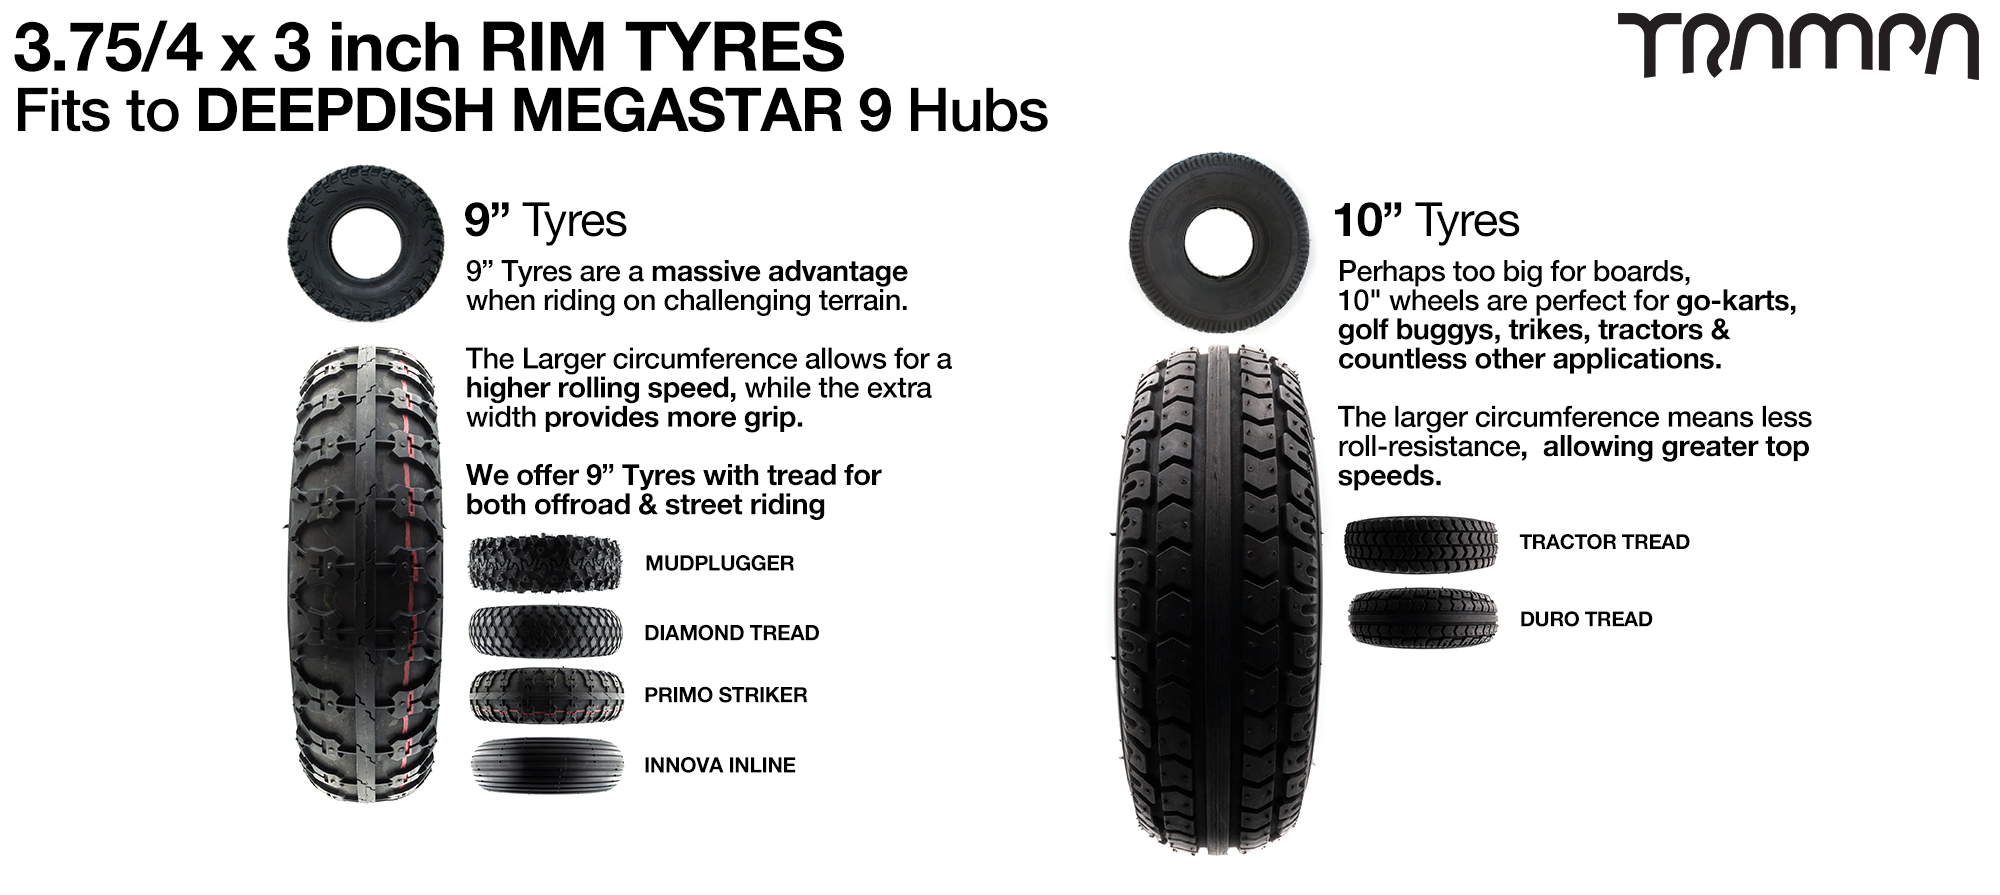 TRAMPA Tyre options for 3.75/4 x 3 Inch Rims includes All 9 Inch tyres & all 10 Inch Tyres TRAMPA offers